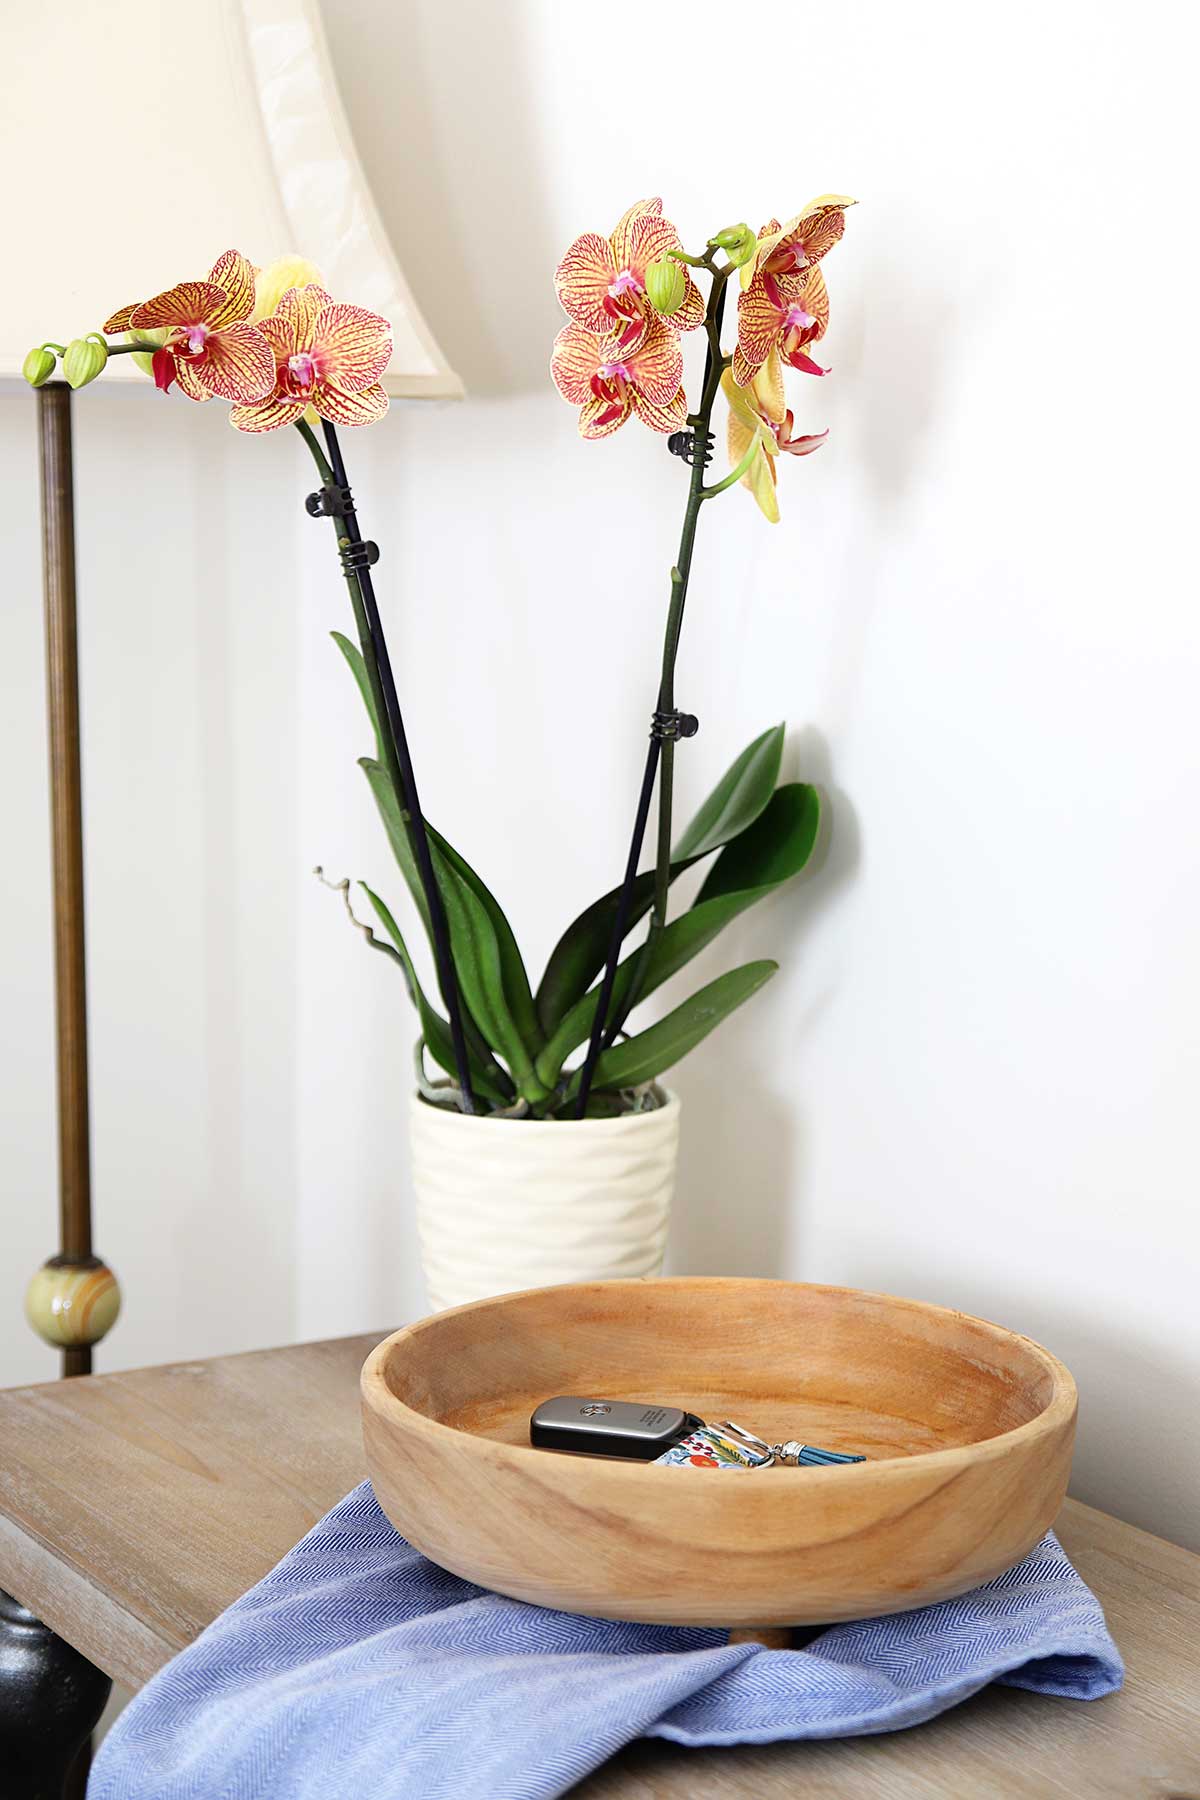 Bleached wooden bowl for farmhouse style sitting on counter with orchids